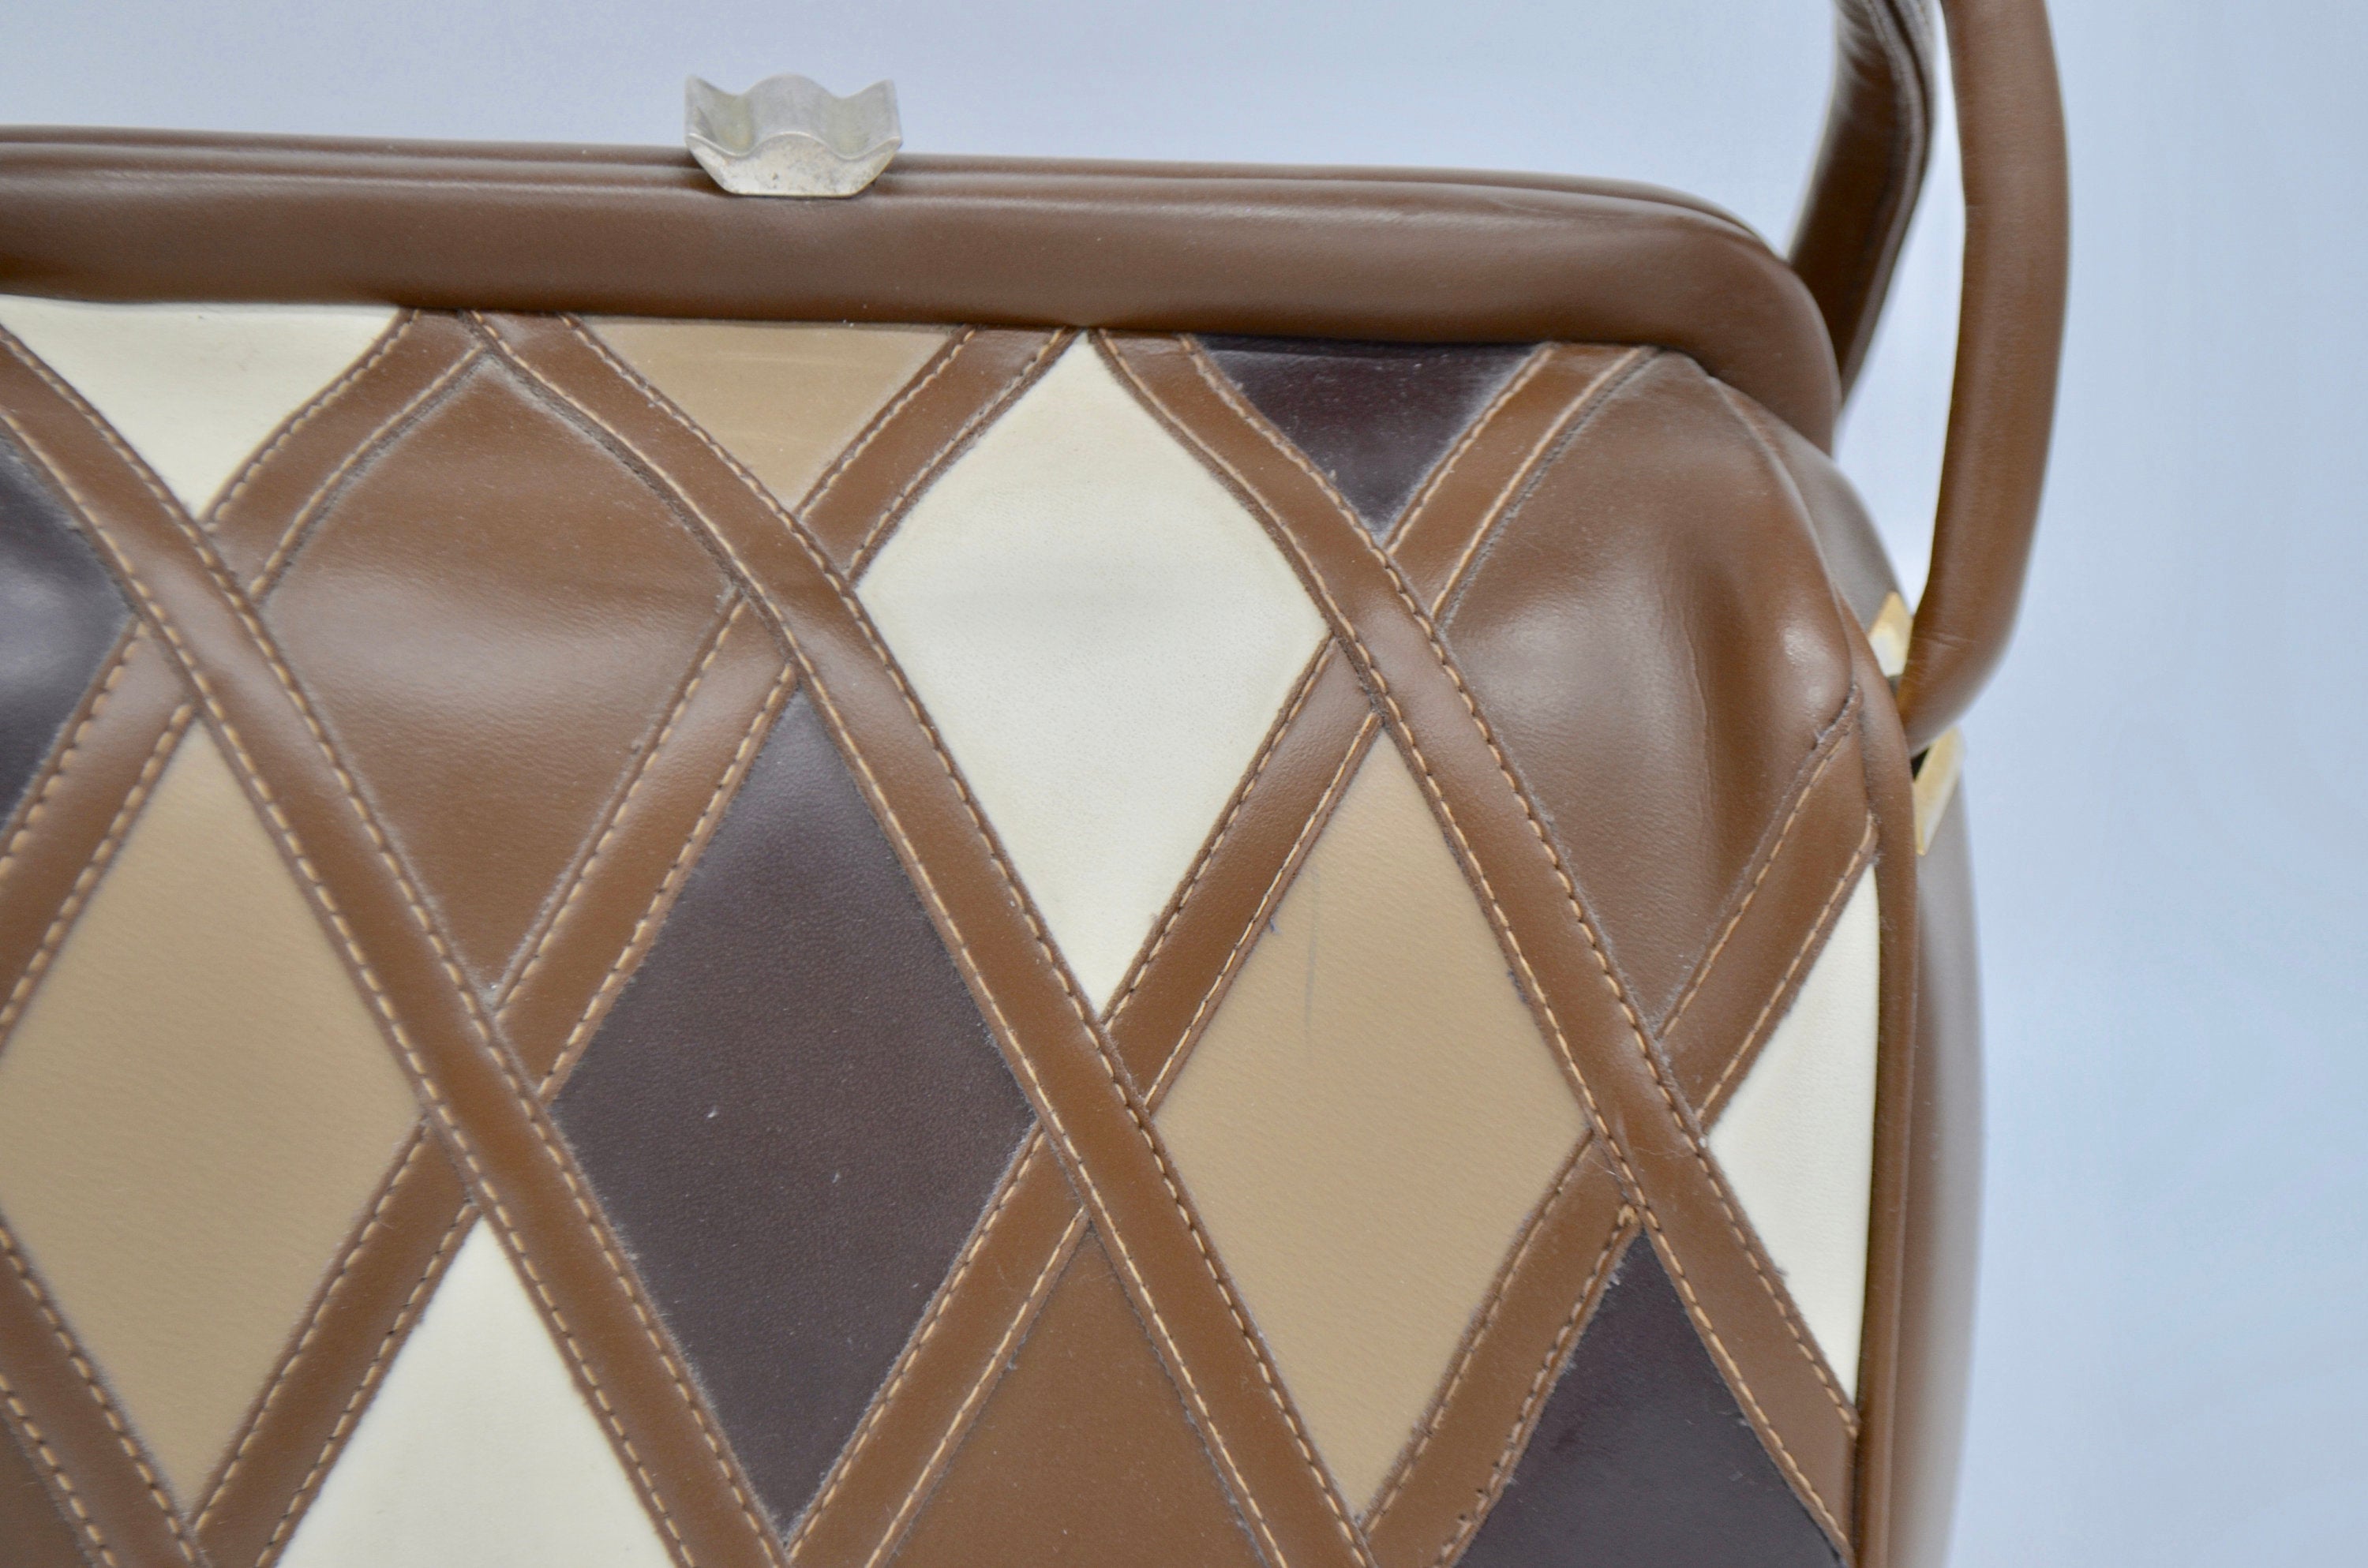 Mod Patchwork Leather Doctor Mini Purses Tan Beige Brown Dulles Bag Miniature Carry On